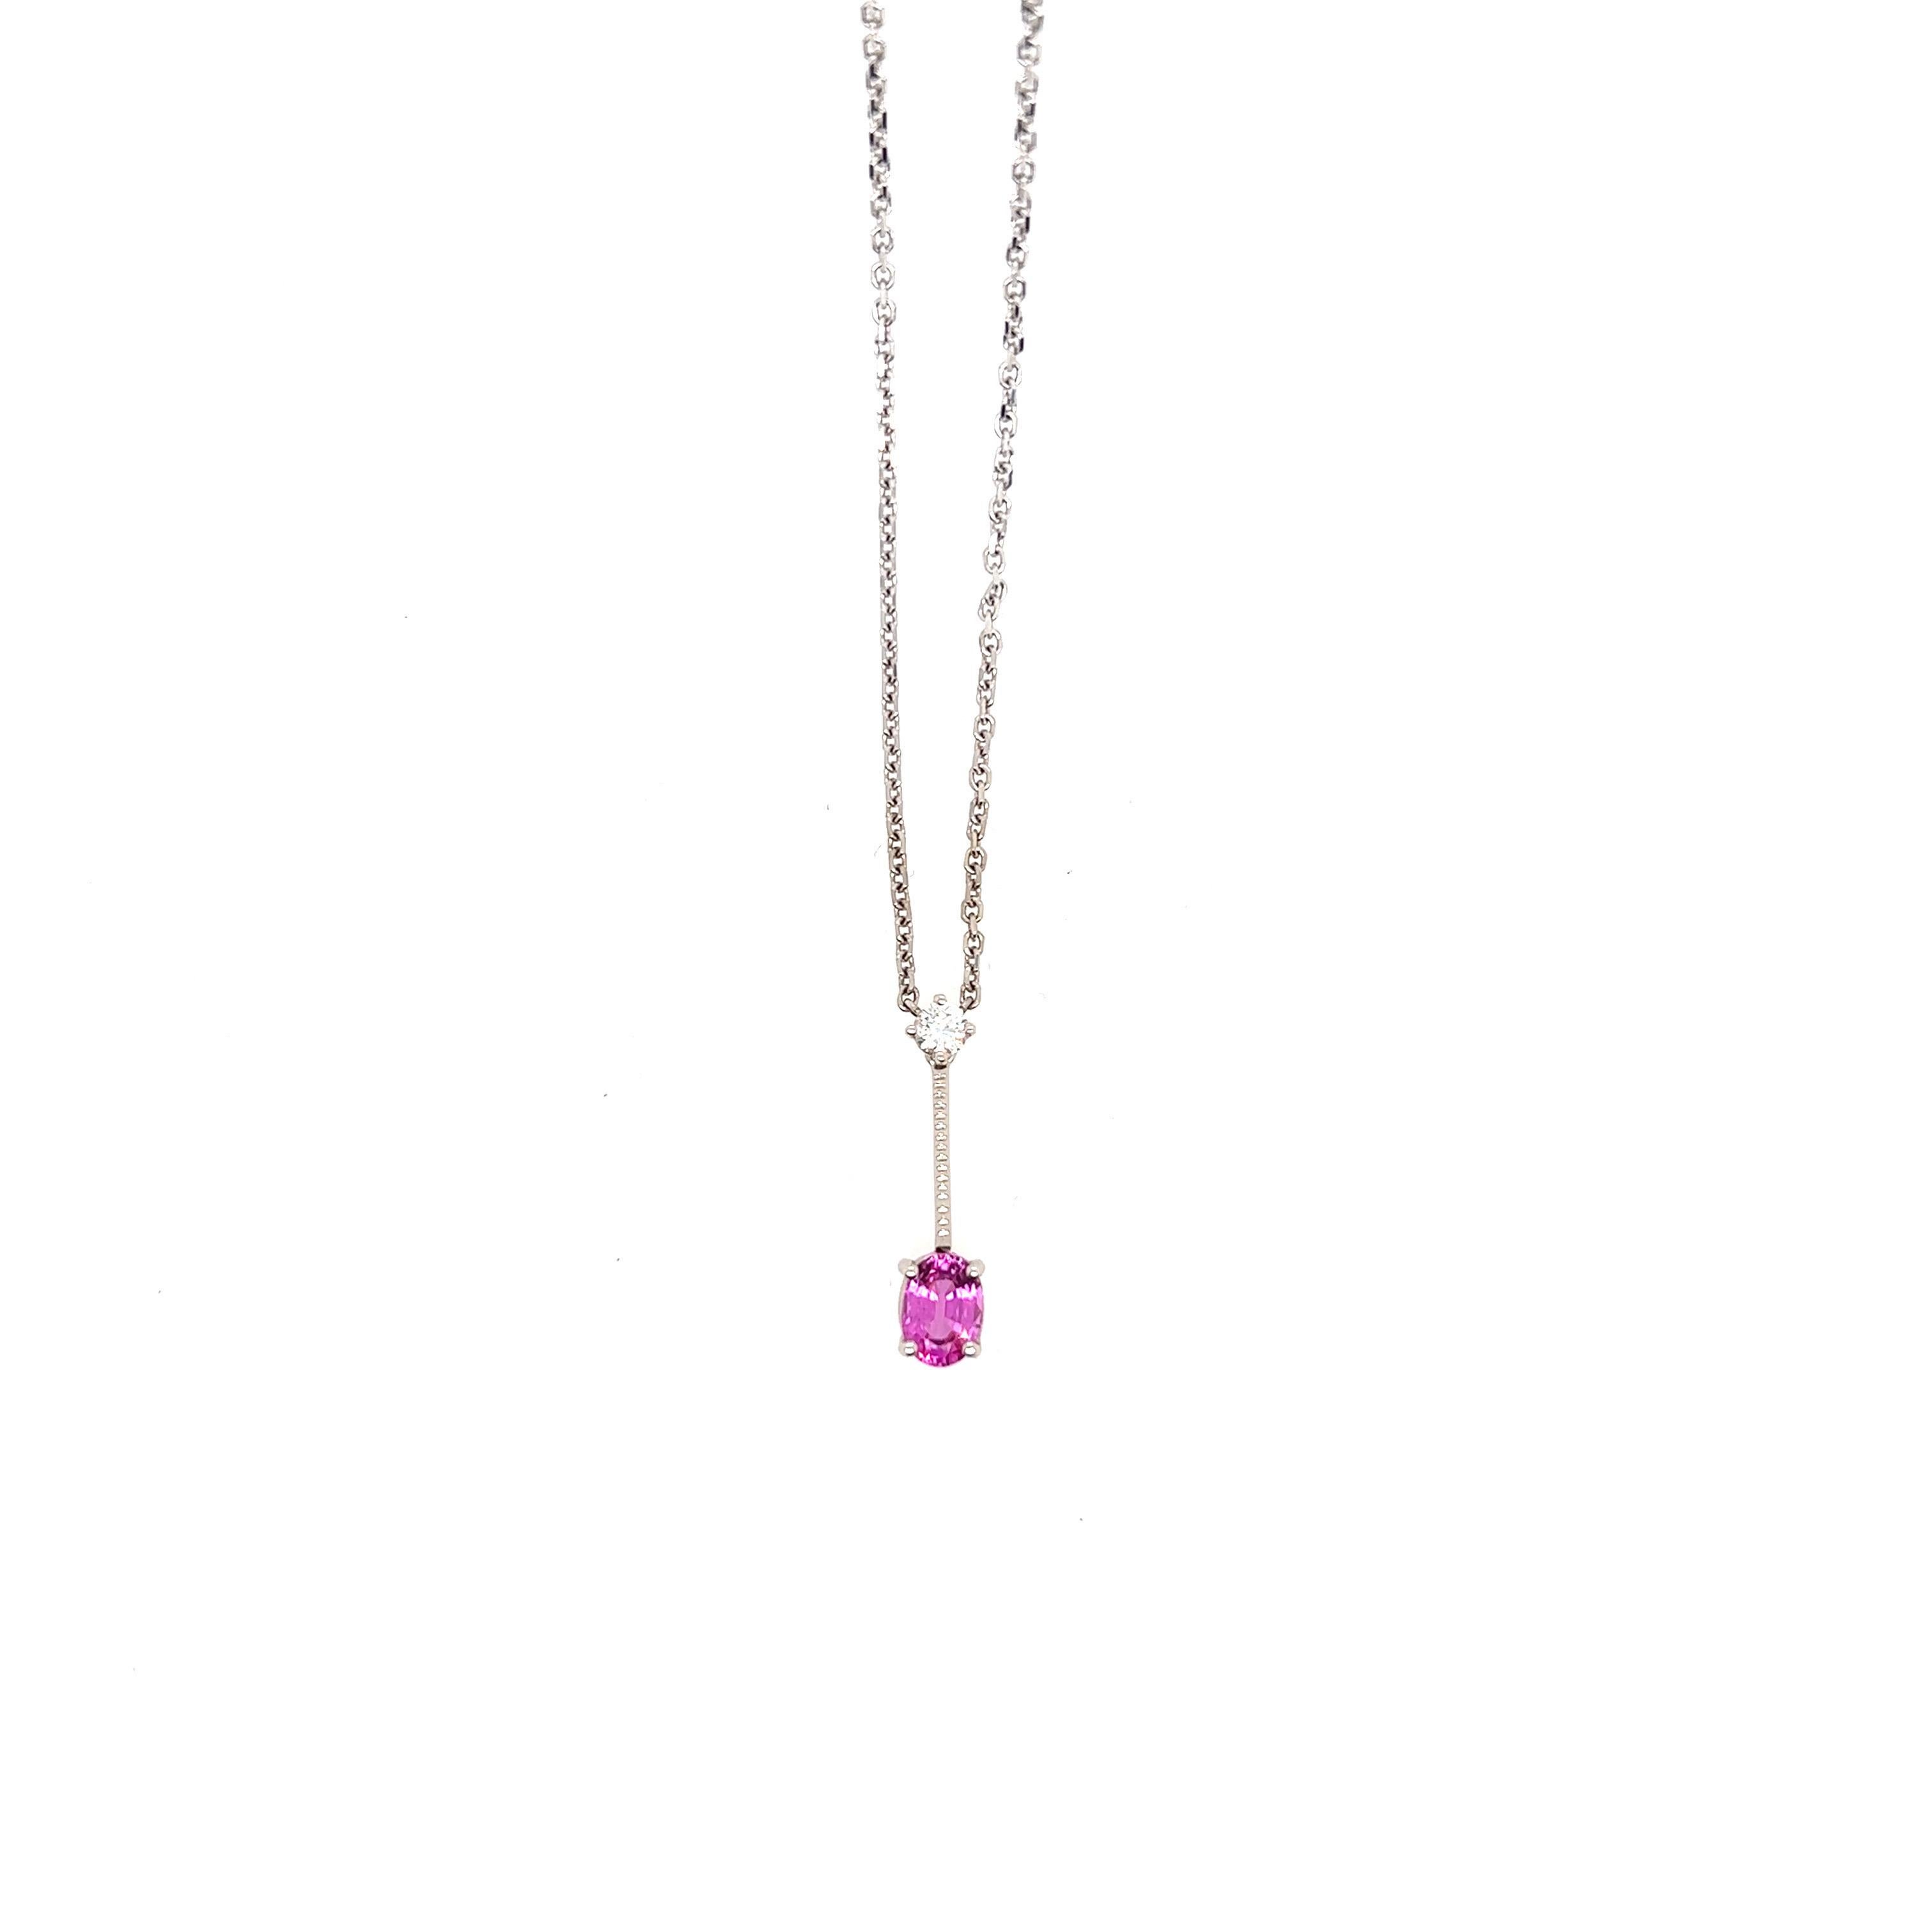 Women's Modern Gold 1.15 Carat Natural Oval Pink Sapphire Gem Stone and Diamond Pendant For Sale